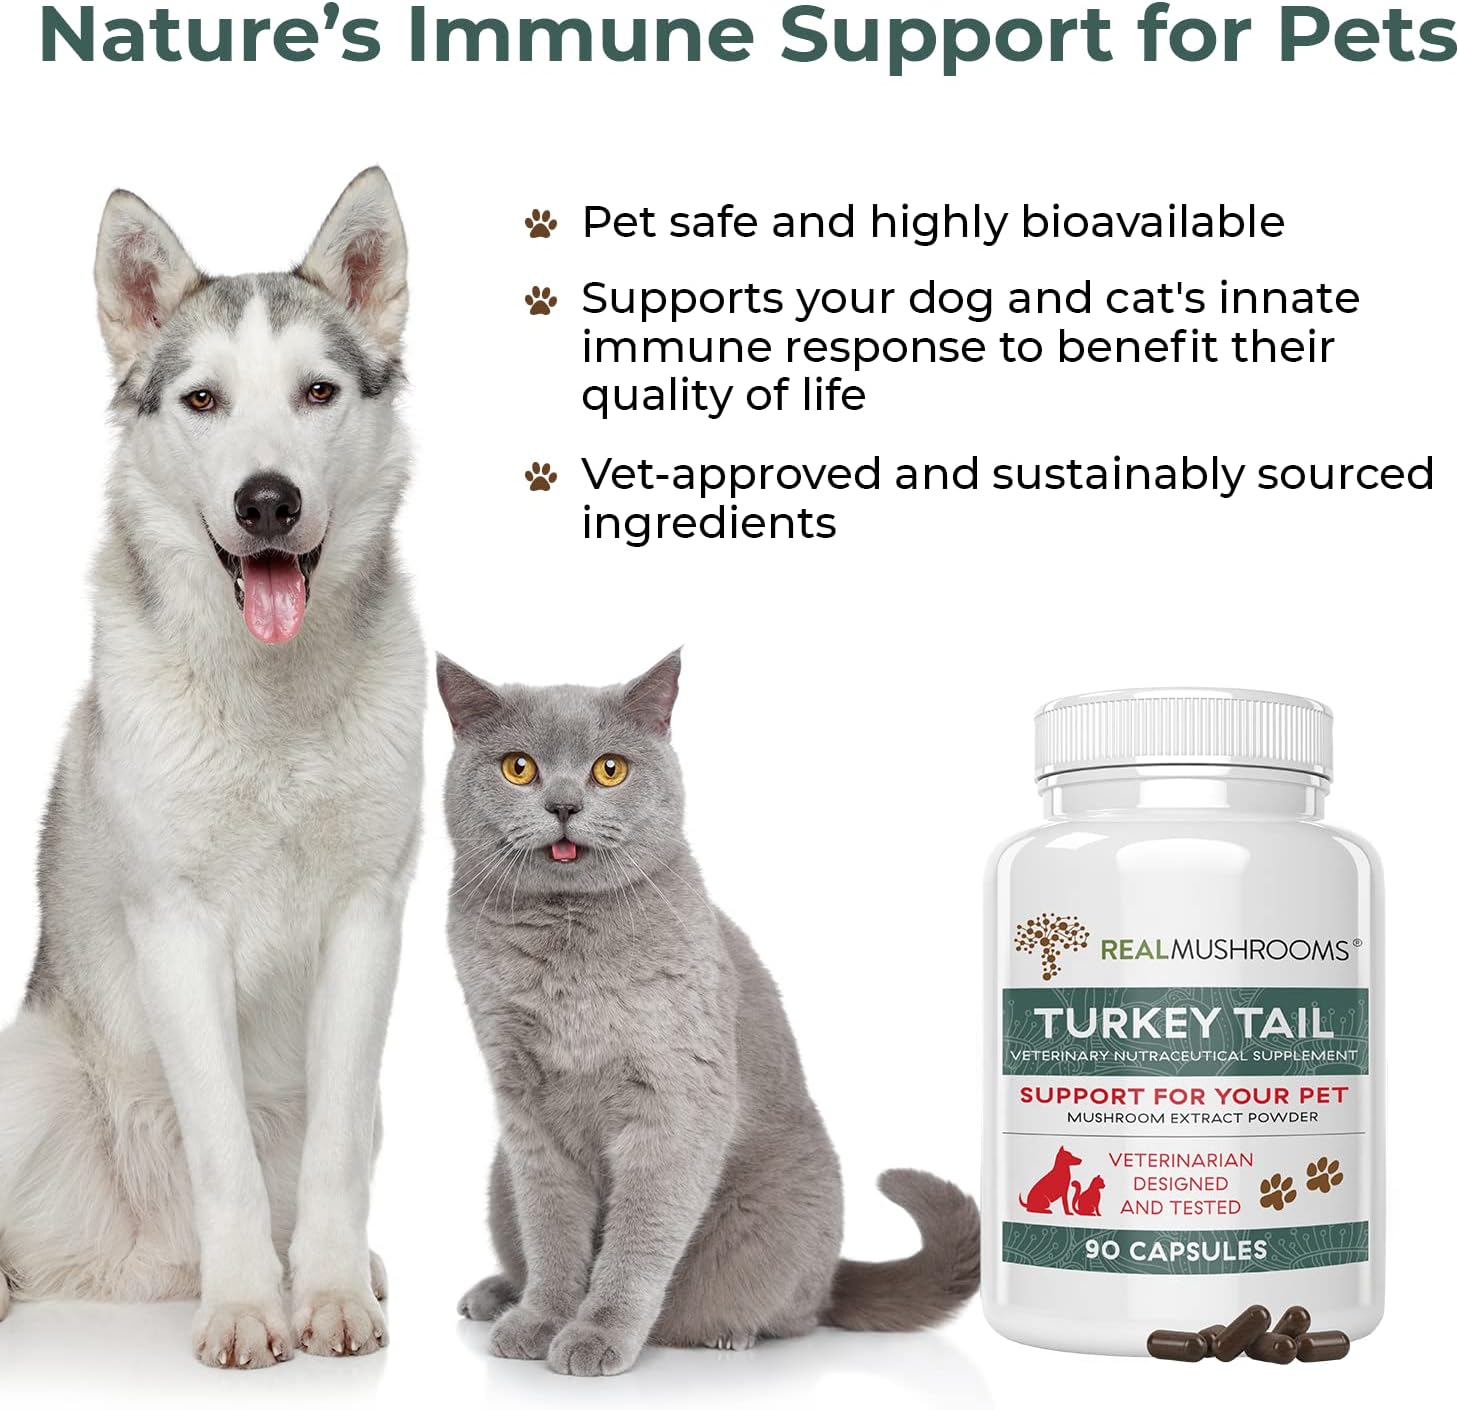 Turkey Tail Pet Support - Dog Multivitamins and Supplements for Immune Support, Gut Health & Wellness - Grain-Free, Gluten-Free, Vet-Approved Dog Supplement (90ct) : Pet Supplies